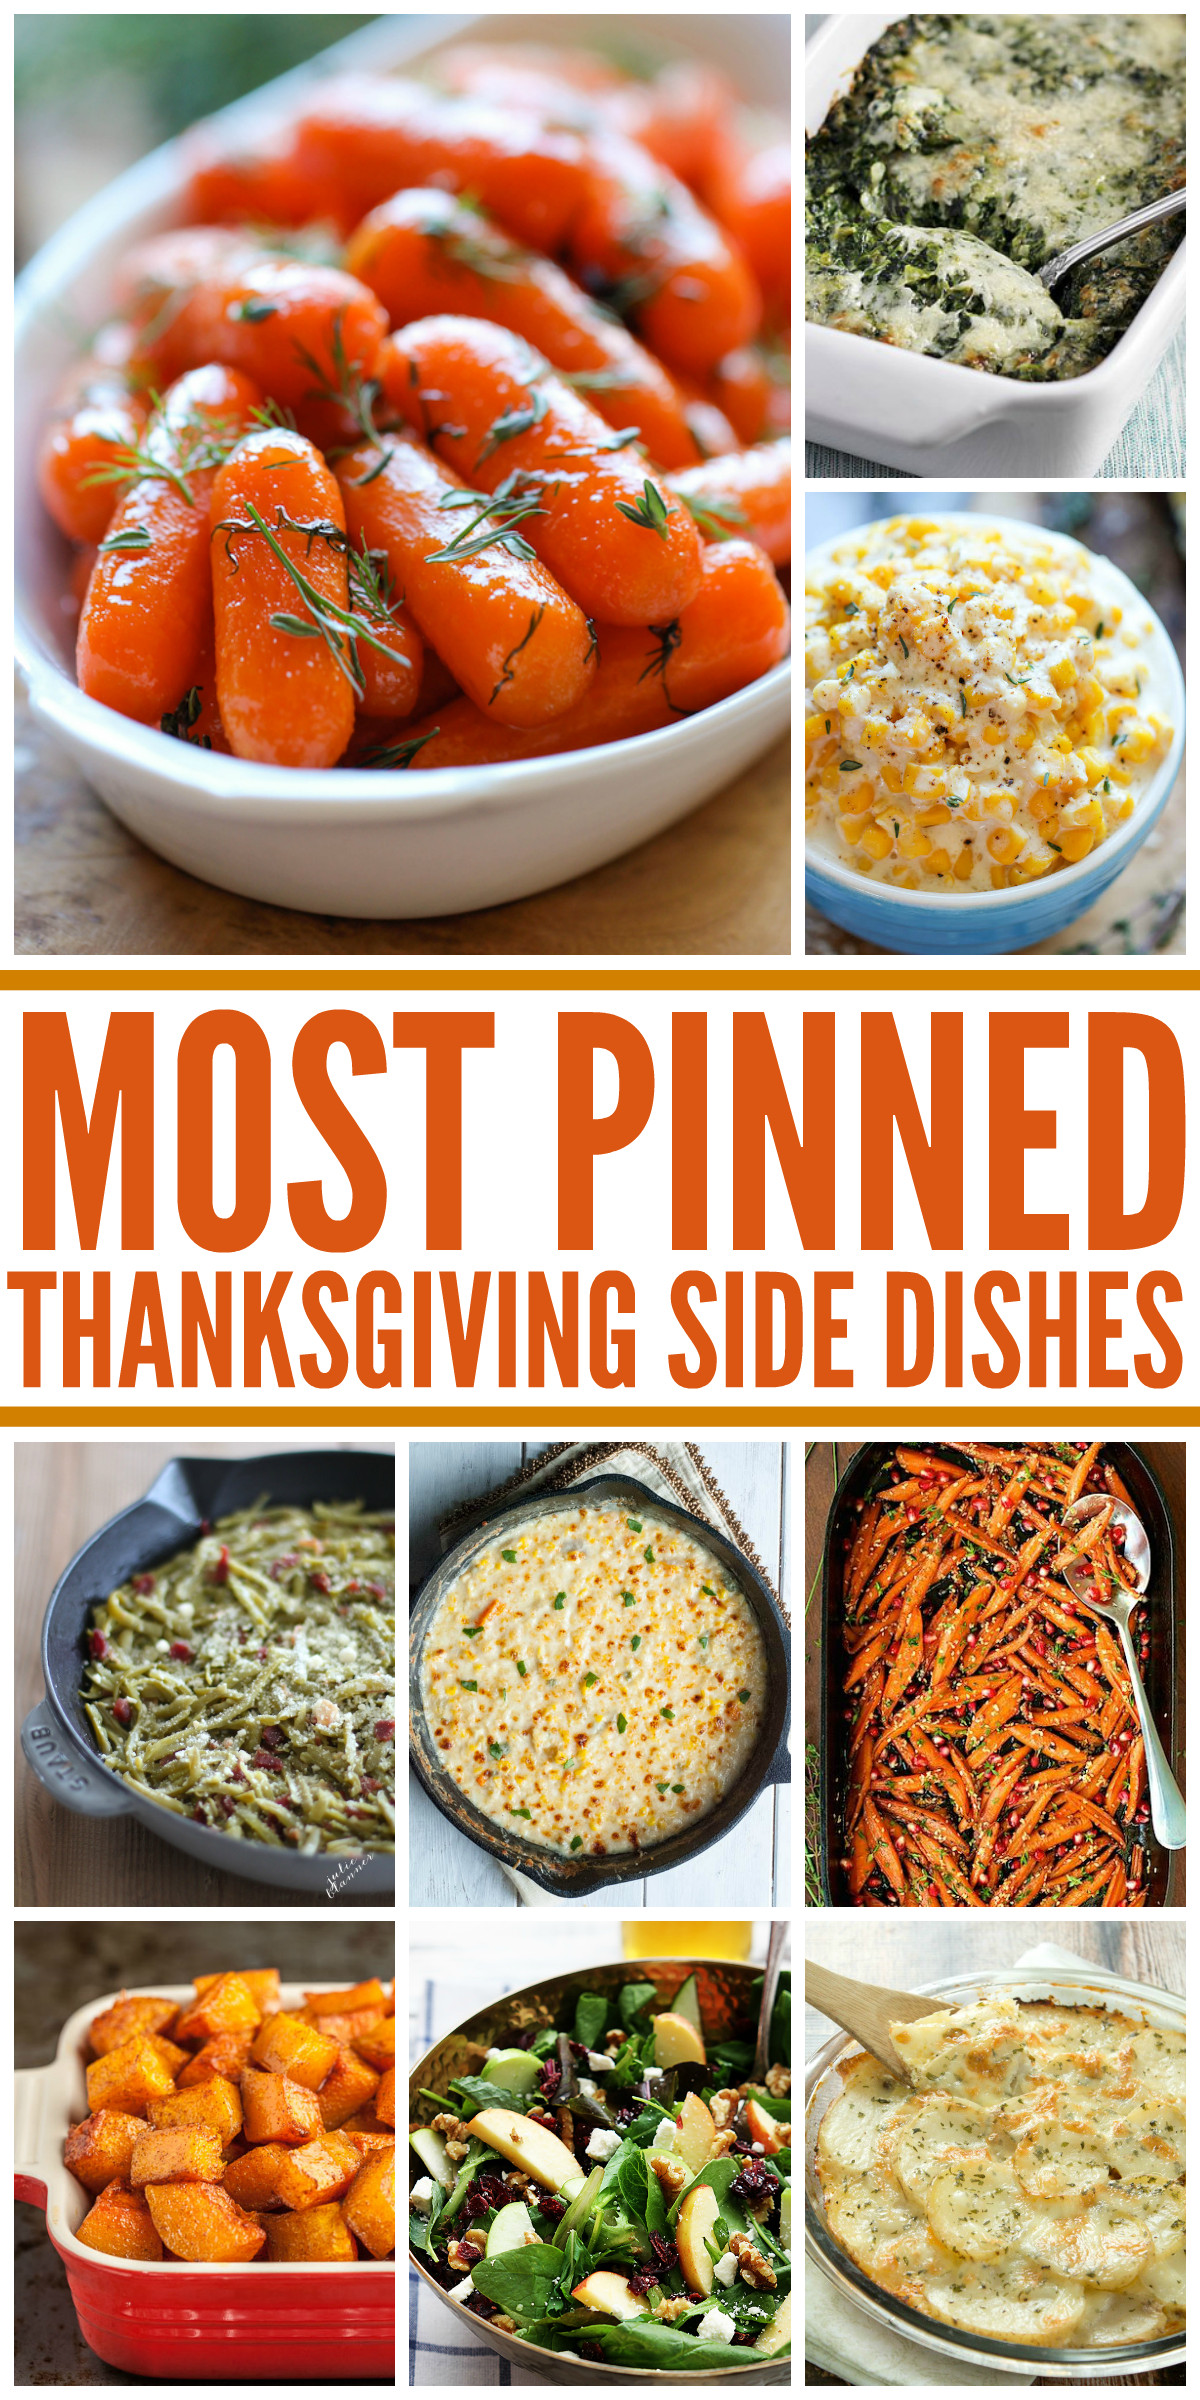 Brunch Side Dishes
 25 Most Pinned Holiday Side Dishes